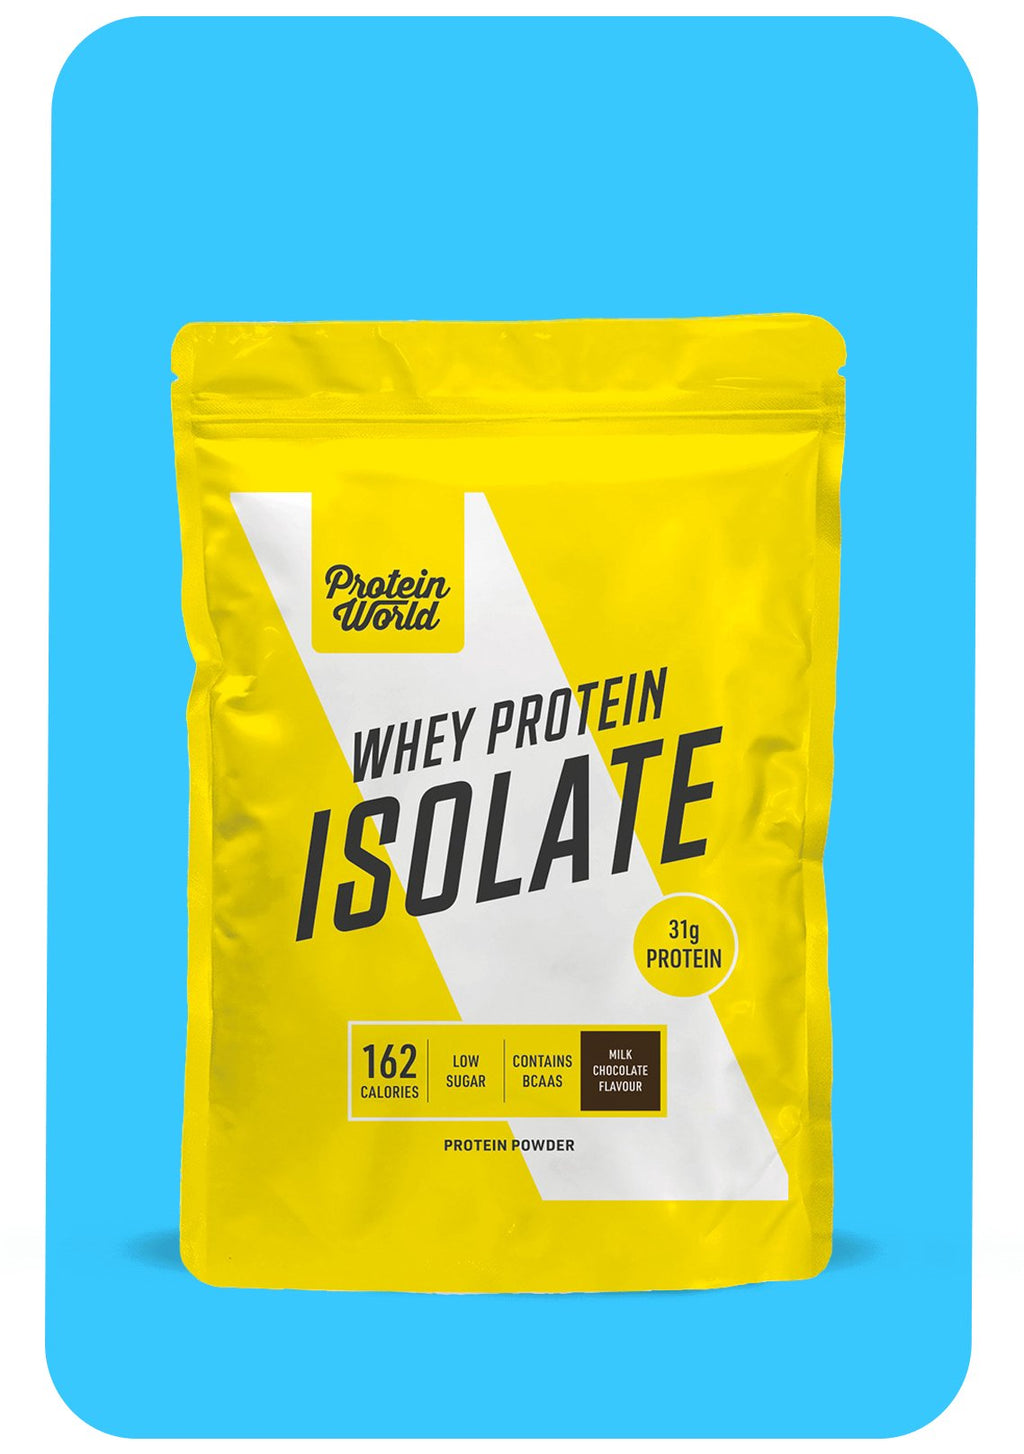 Bulk Whey Protein Isolate - High Quality Protein by New World Nutritionals,  Strawberry Flavor Protein Powder, 3 Ibs, Direct From Manufacturer 